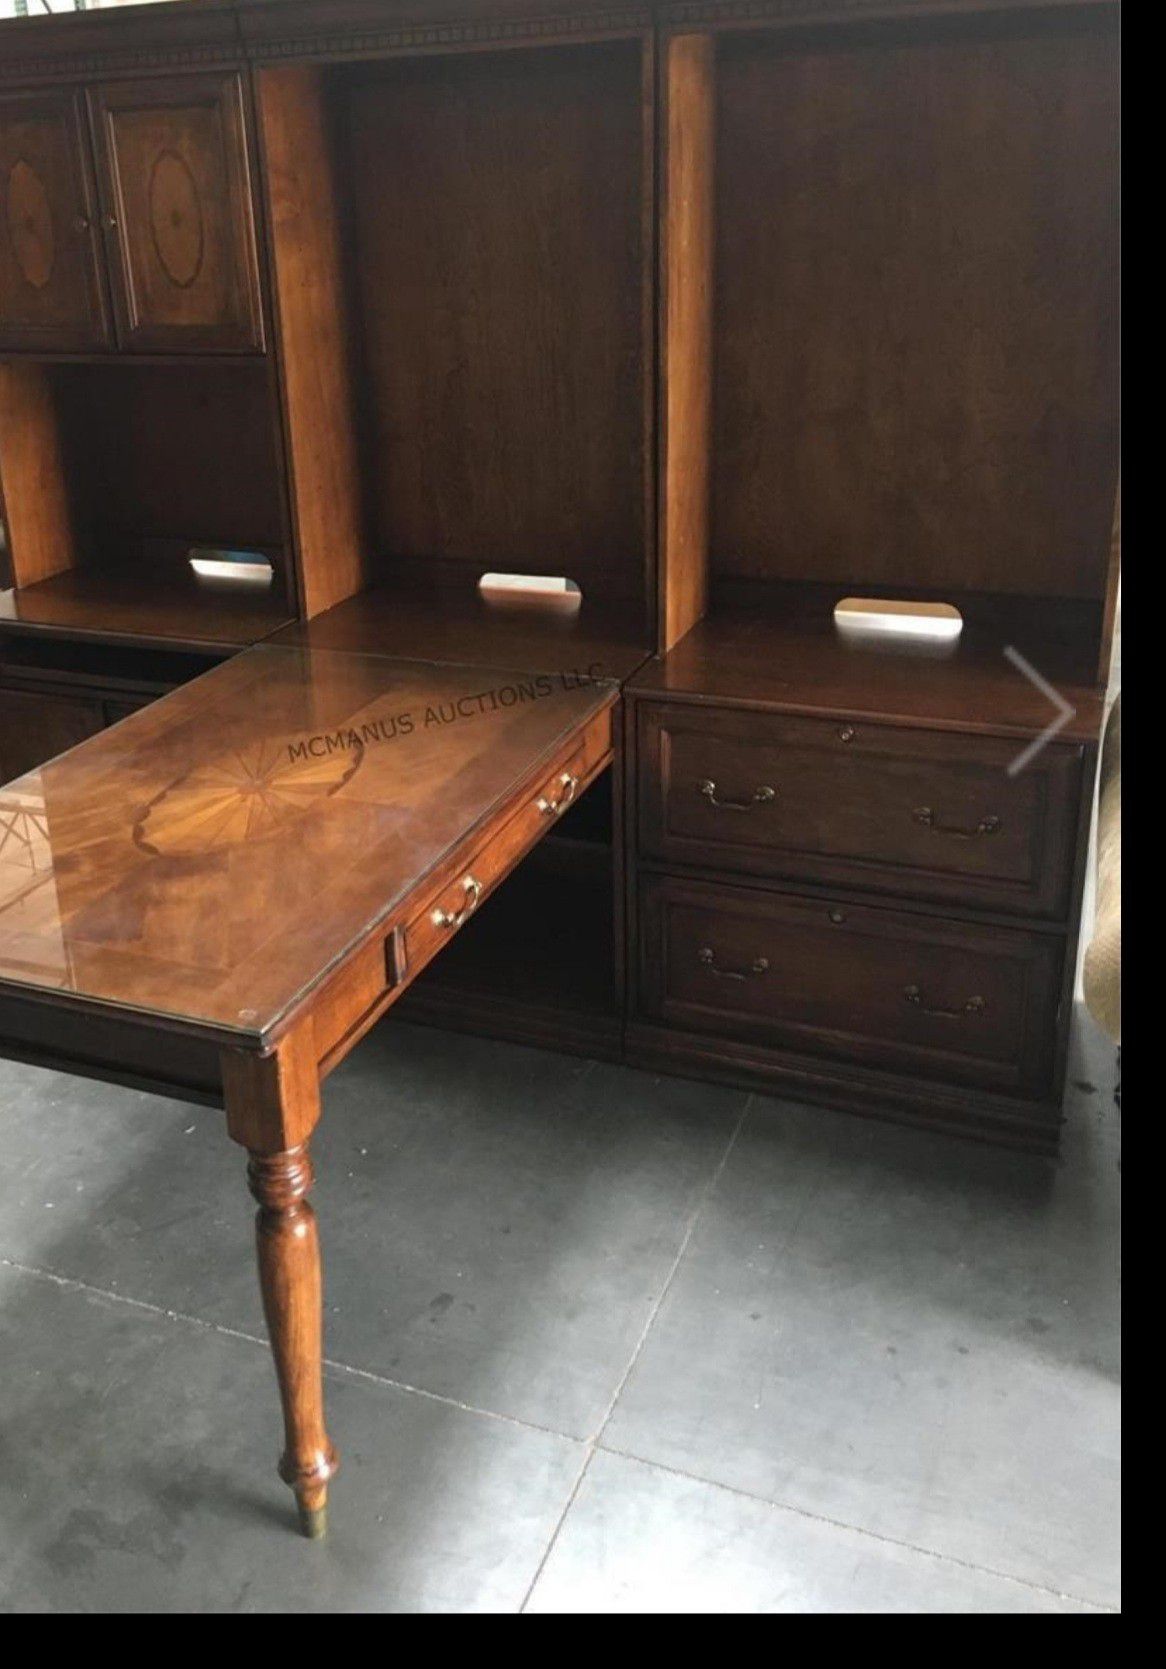 Beautiful 2 person desk with shelves and file cabinet